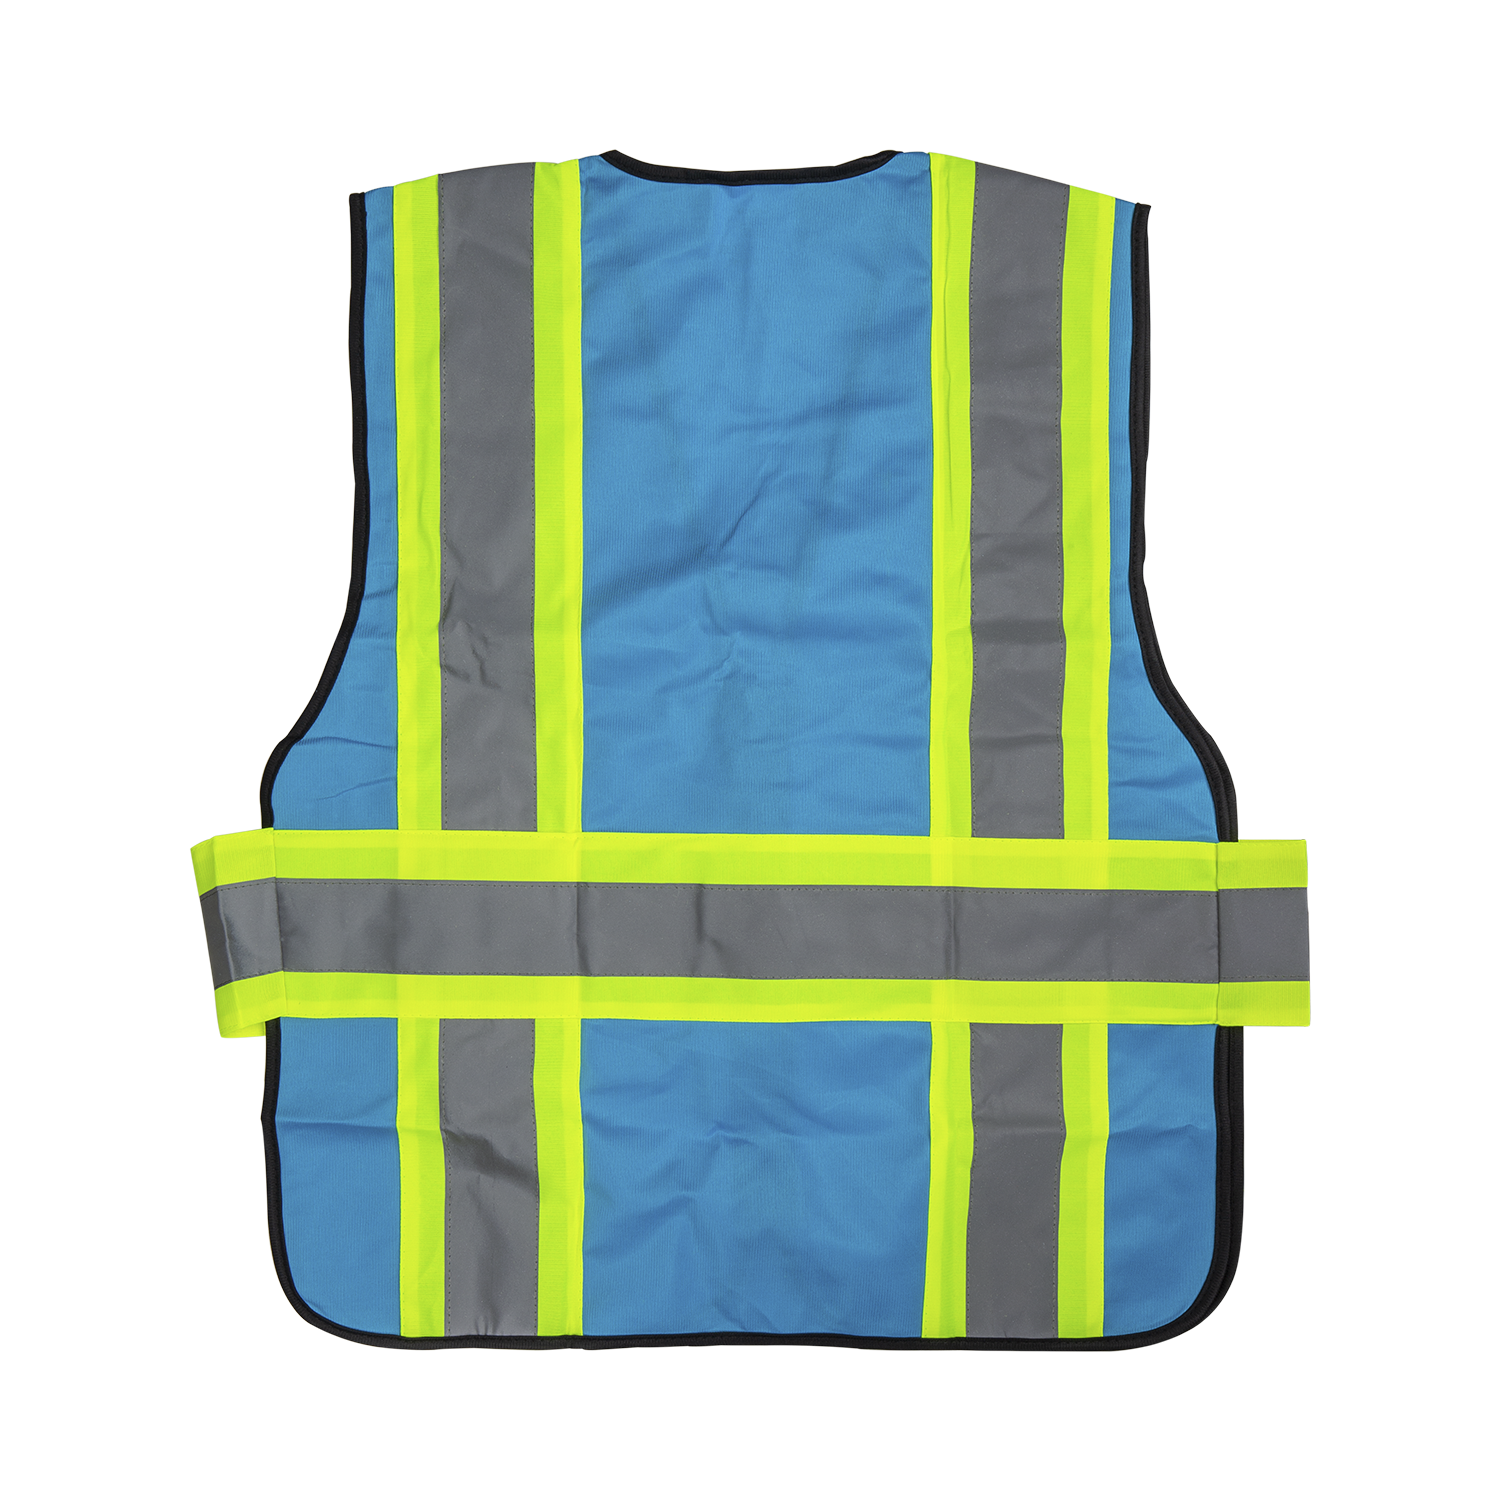 Karat High Visibility Reflective Safety Vest with Zipper Fastening (Blue), Large - 1 pc